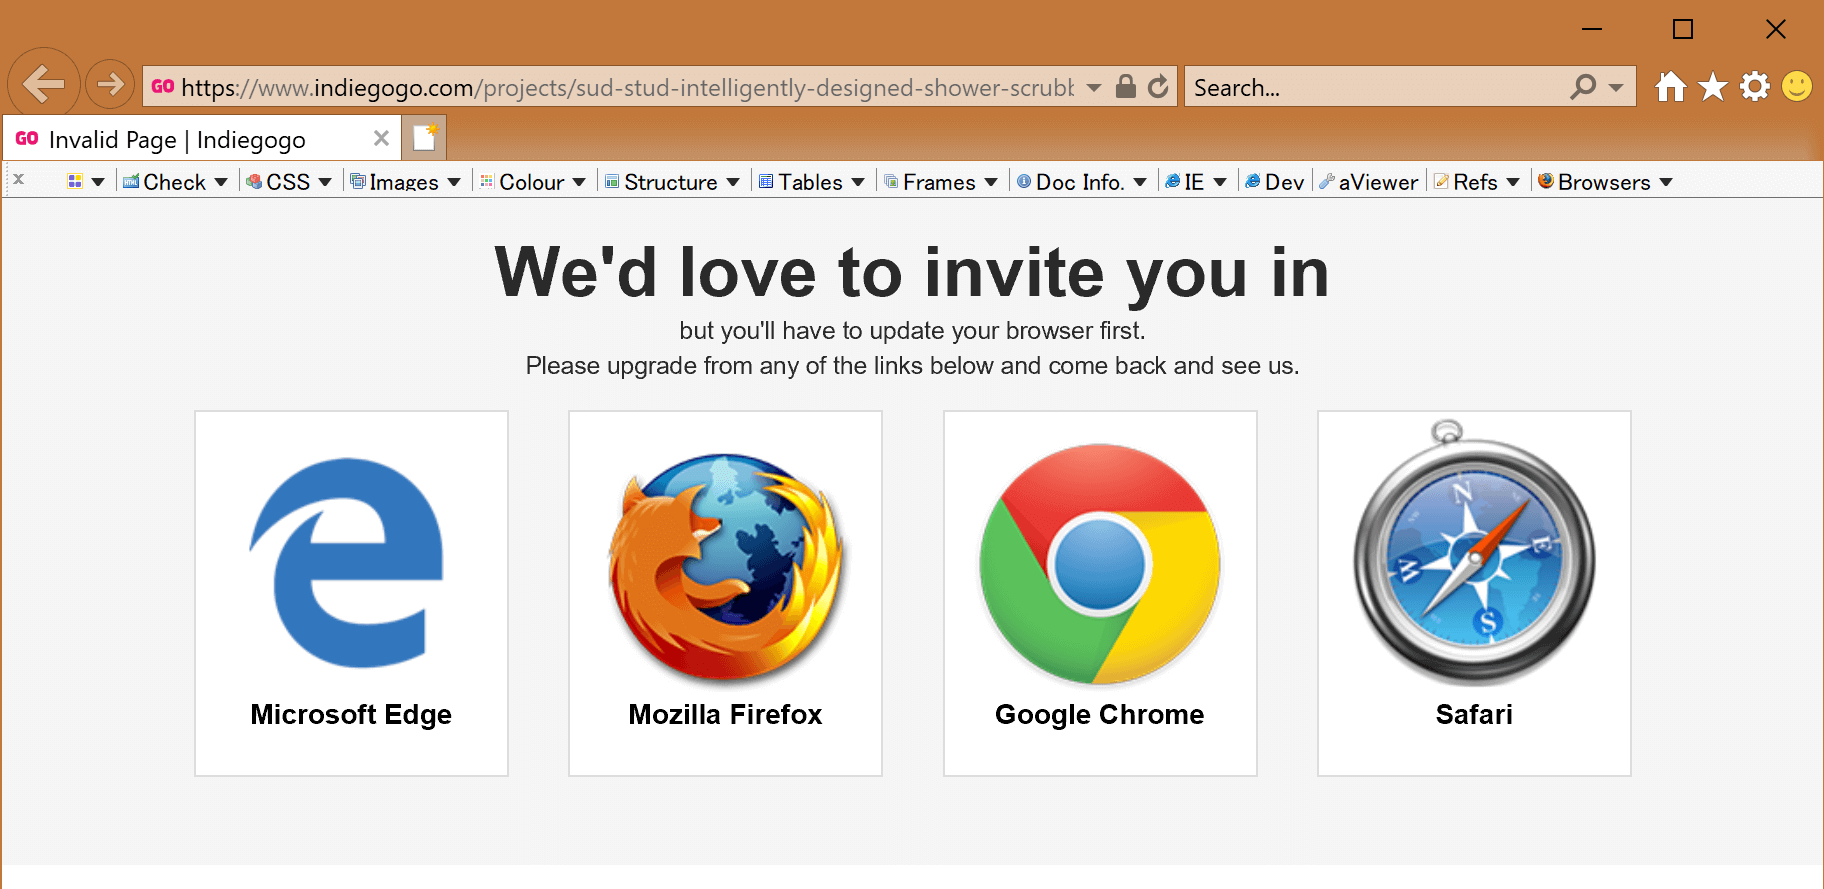 Internet Explorer window with a message that reads: “We'd love to invite you in but you'll have to update your browser first. Please upgrade from any of the links below and come back and see us.” Then logos / links for Microsoft Edge, Mozilla Firefox, Google Chrome, and Safari.